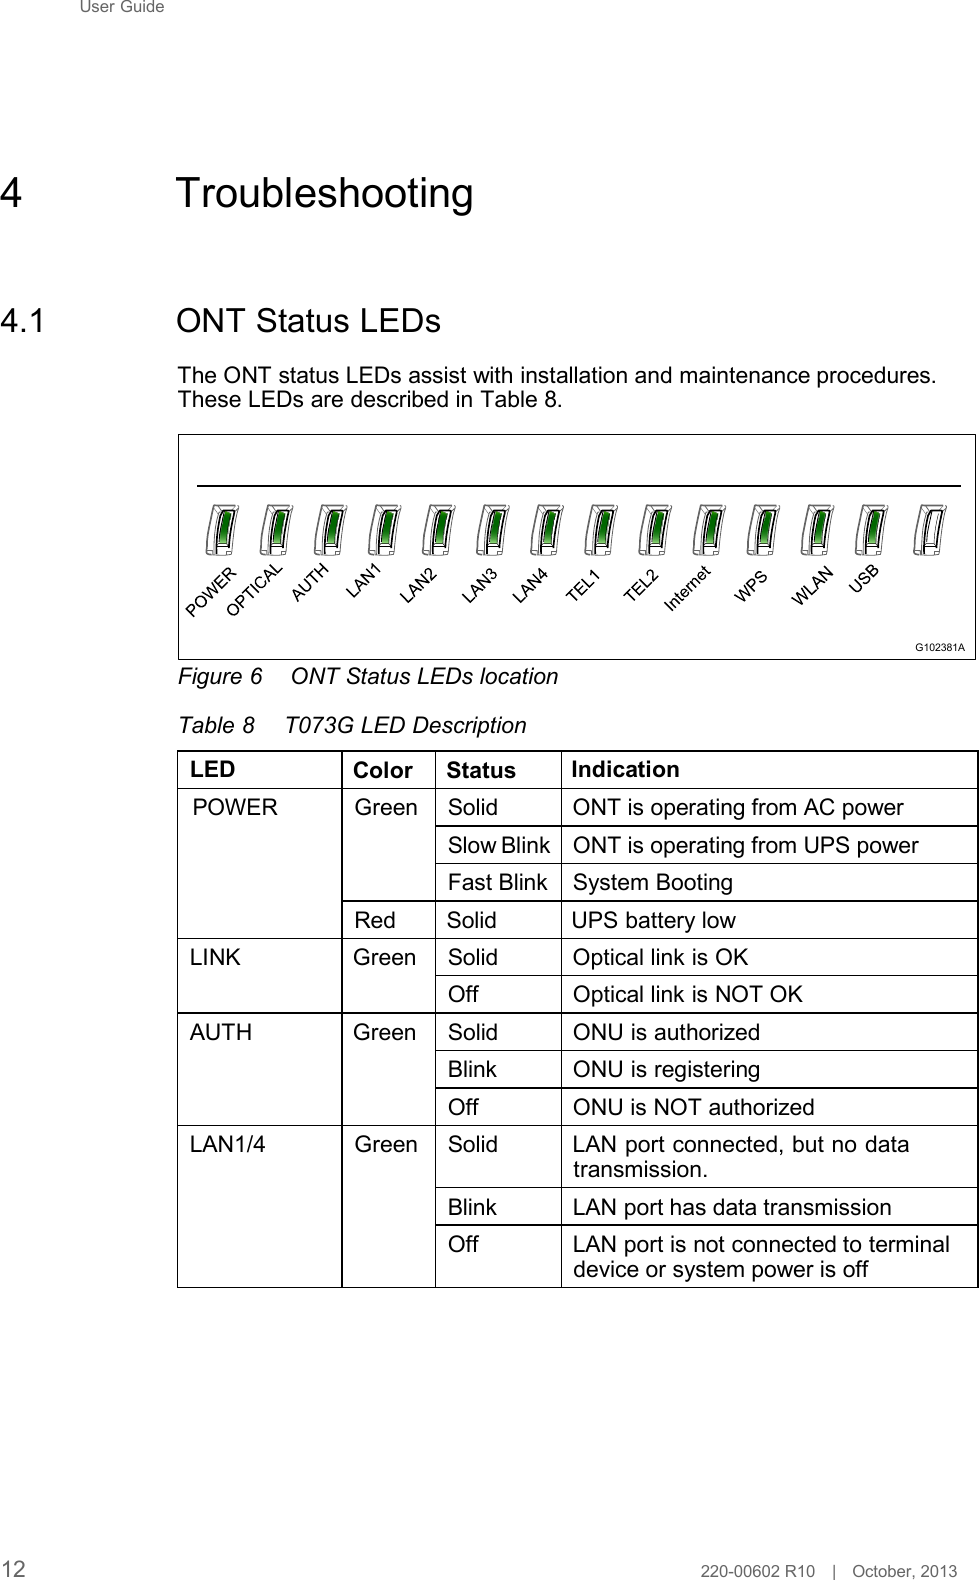 User Guide        4  Troubleshooting     4.1  ONT Status LEDs  The ONT status LEDs assist with installation and maintenance procedures. These LEDs are described in Table 8.             Figure 6  ONT Status LEDs location  Table 8  T073G LED Description  LED Color Status Indication G102381A  POWER  Green  Solid ONT is operating from AC power  Slow Blink ONT is operating from UPS power  Fast Blink System Booting  Red Solid UPS battery low  LINK Green   AUTH Green  Solid Optical link is OK  Off Optical link is NOT OK Solid ONU is authorized Blink ONU is registering Off ONU is NOT authorized  LAN1/4    Green  Solid LAN port connected, but no data transmission.  Blink LAN port has data transmission  Off LAN port is not connected to terminal device or system power is off              12 220-00602 R10   |   October, 2013 